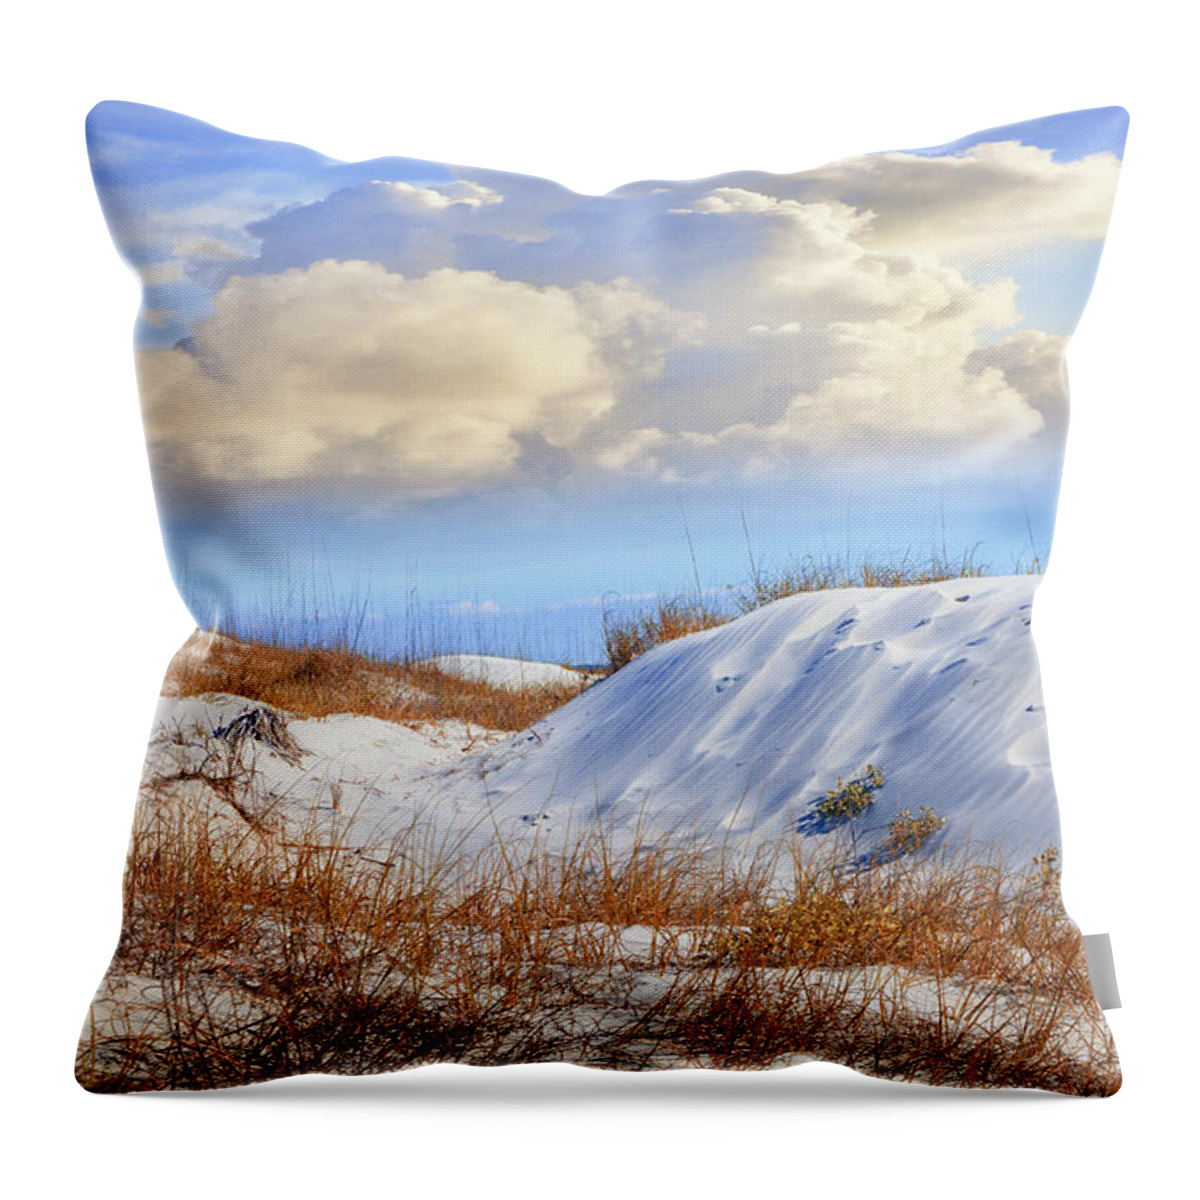 Clouds Throw Pillow featuring the photograph Wild Sand Dunes by Debra and Dave Vanderlaan